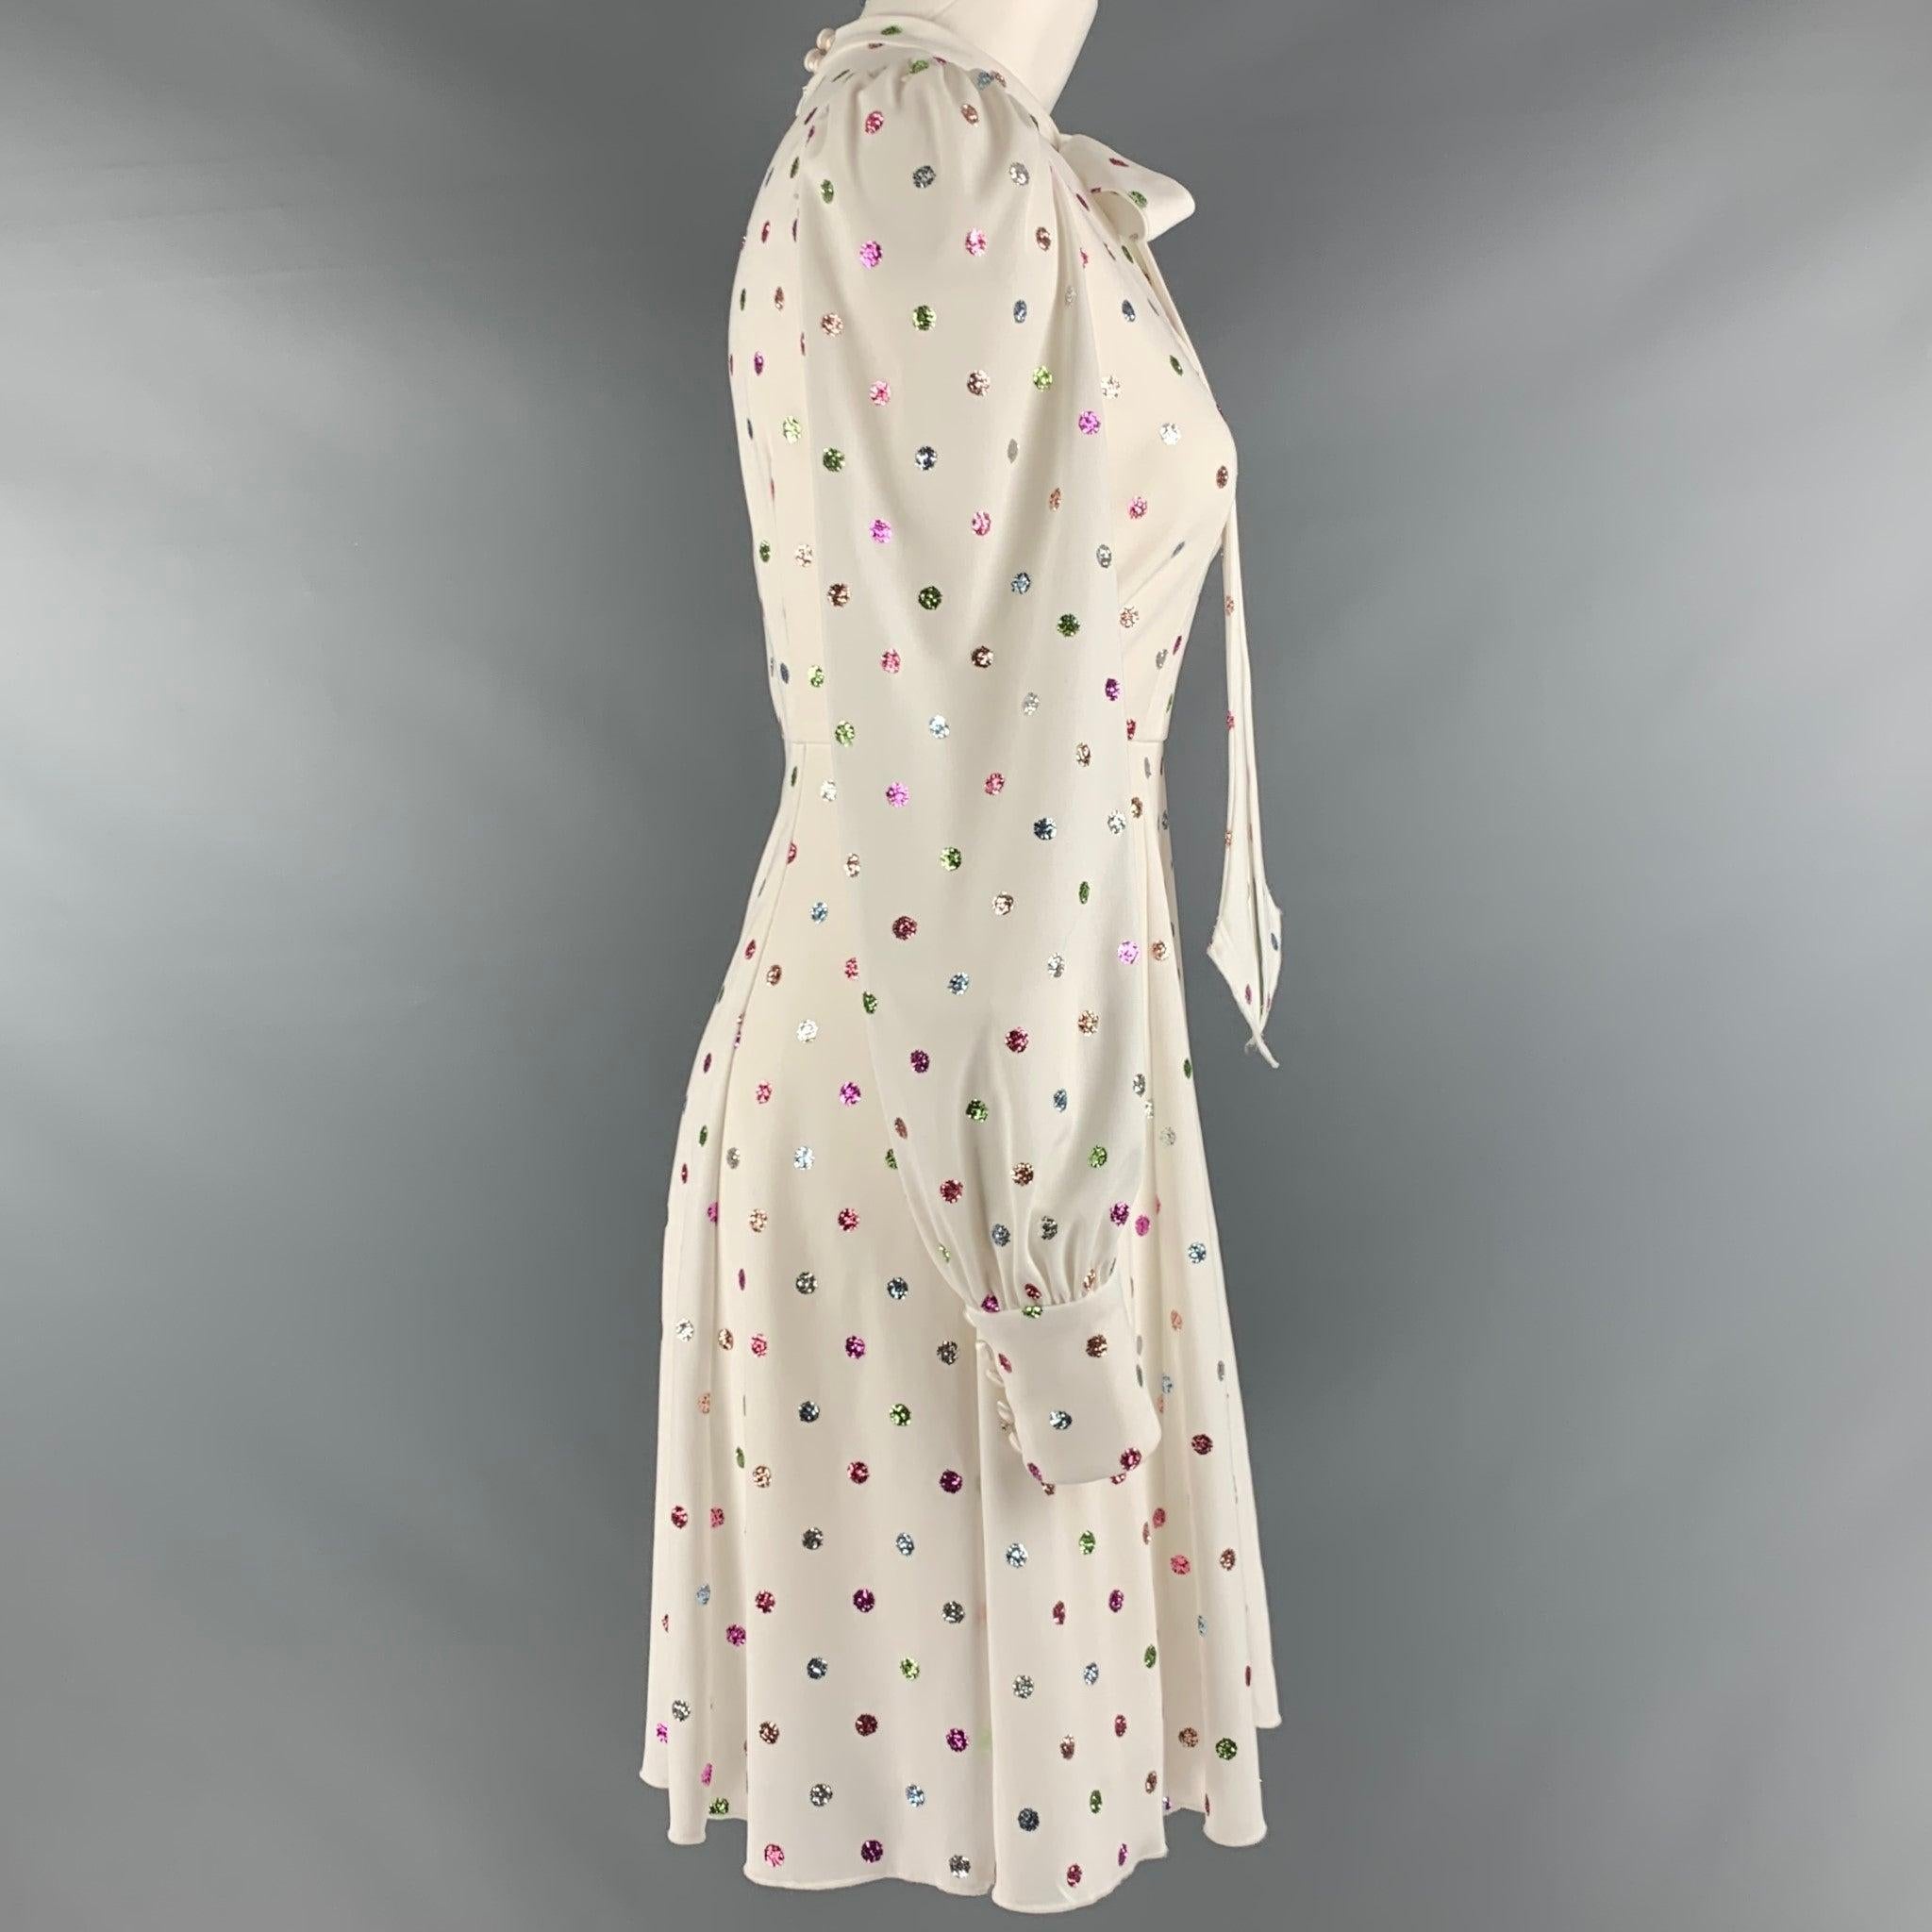 MARC JACOBS Size 2 White Multi Color Polyester Dots A Line Dress In Good Condition For Sale In San Francisco, CA